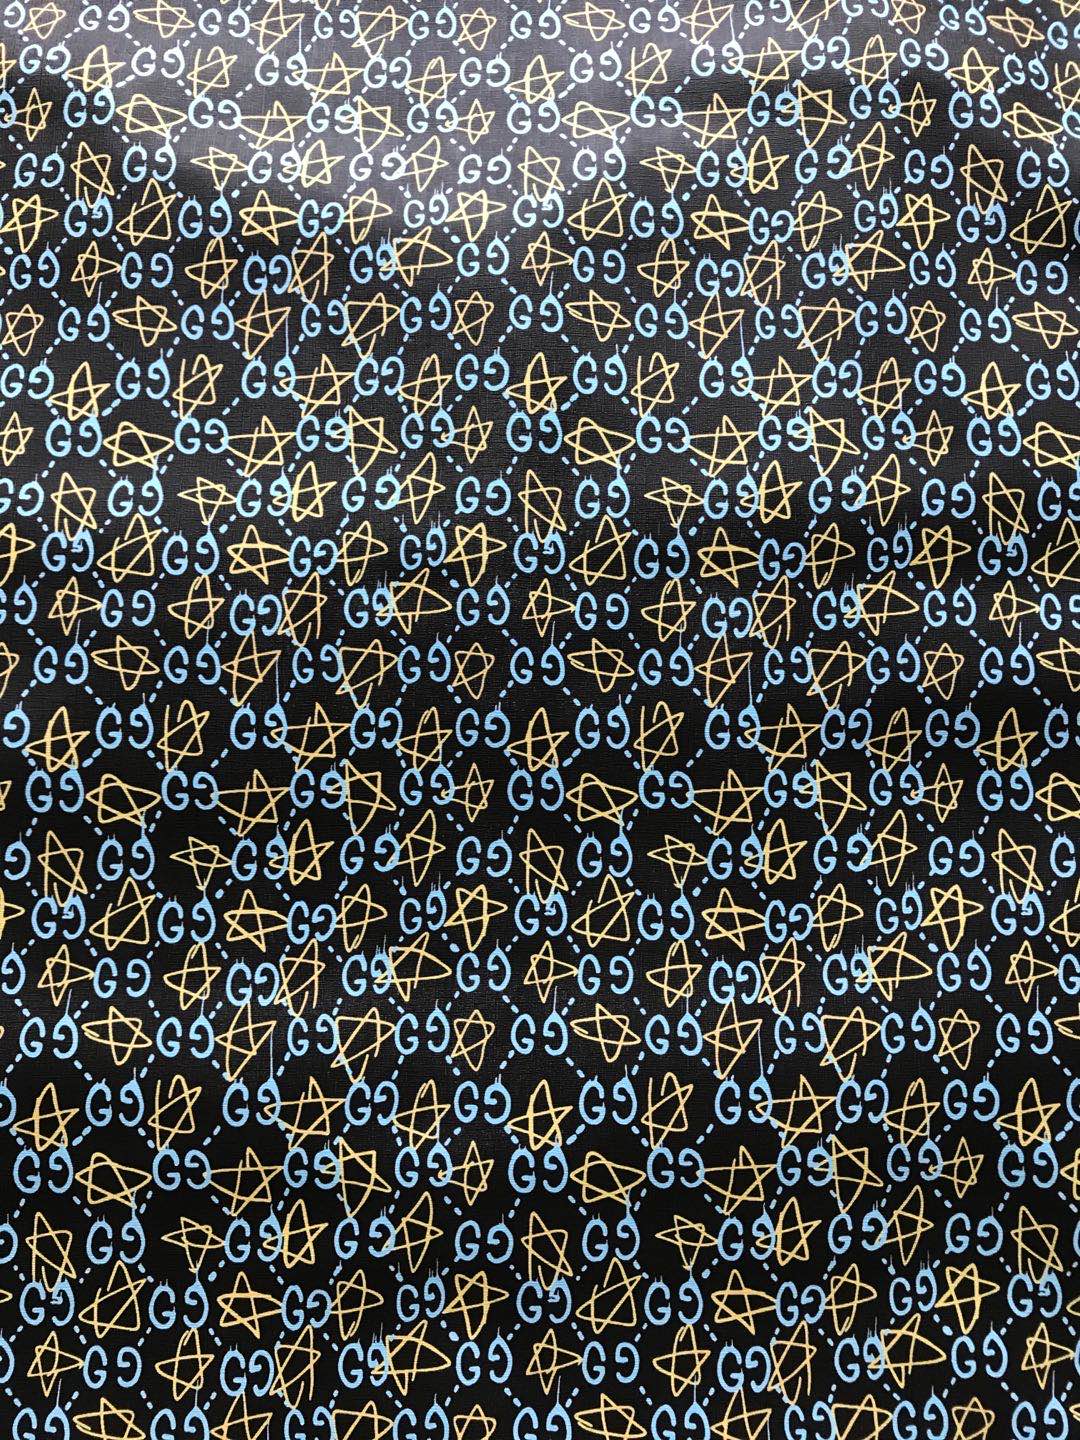 Blue Star Gucci Faux Leather Fabric